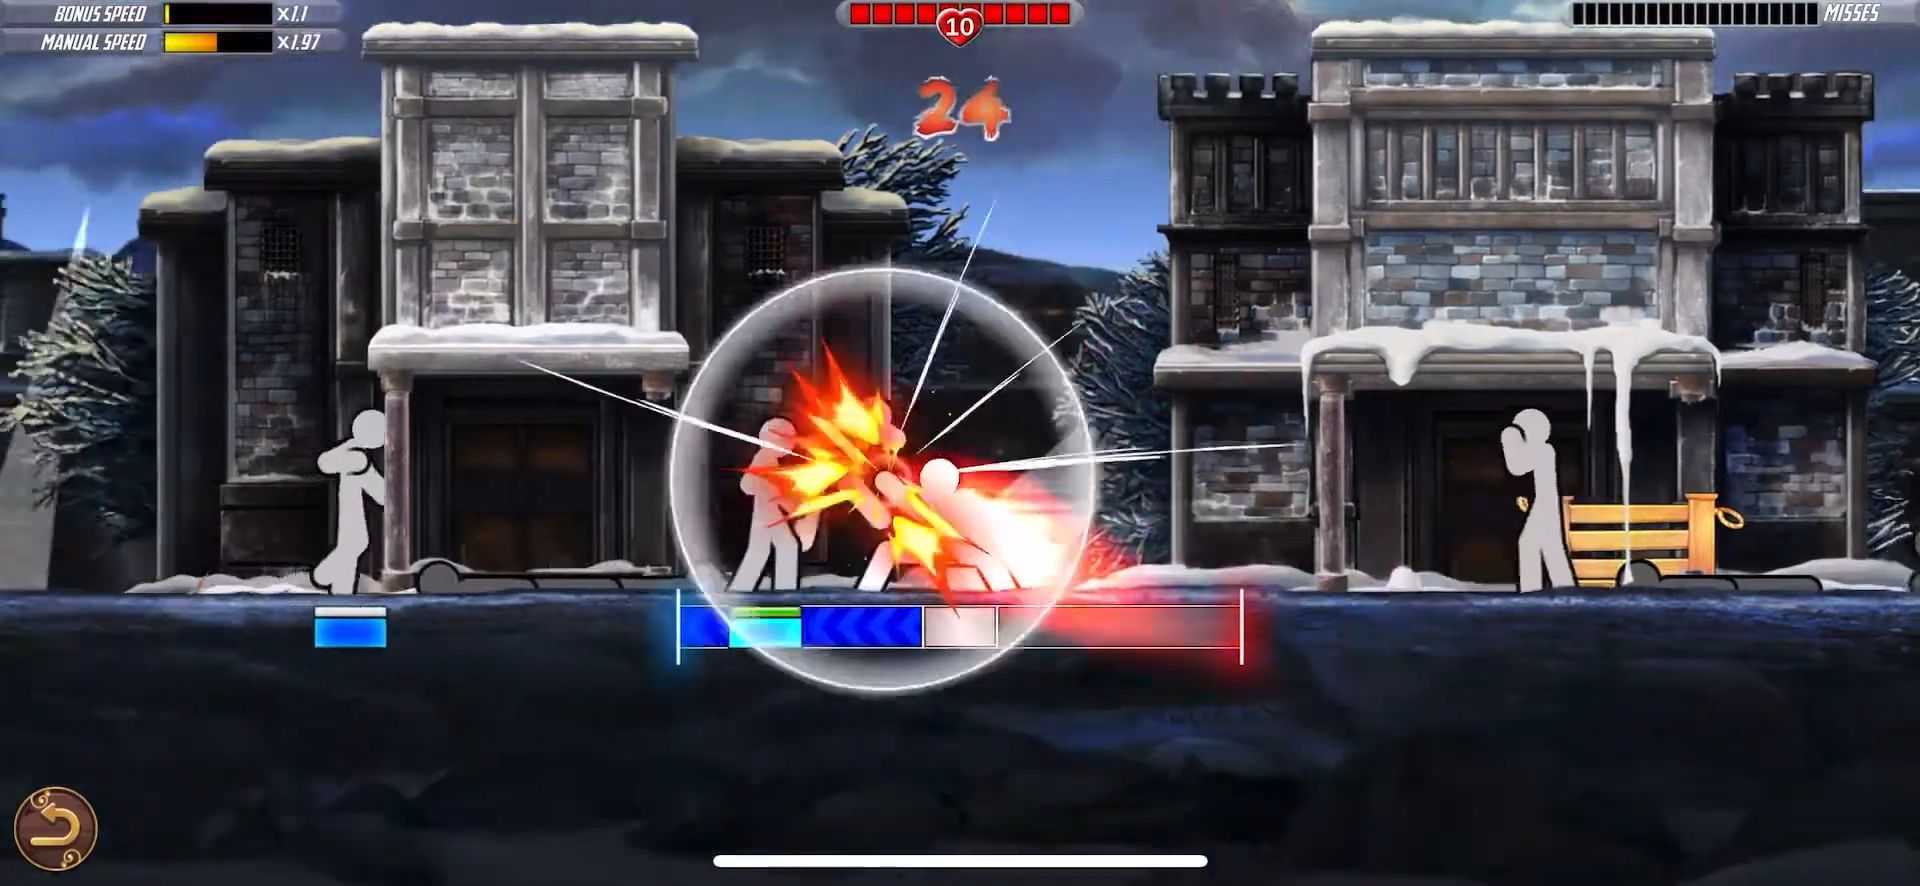 One Finger Death Punch 2 - Android game screenshots.